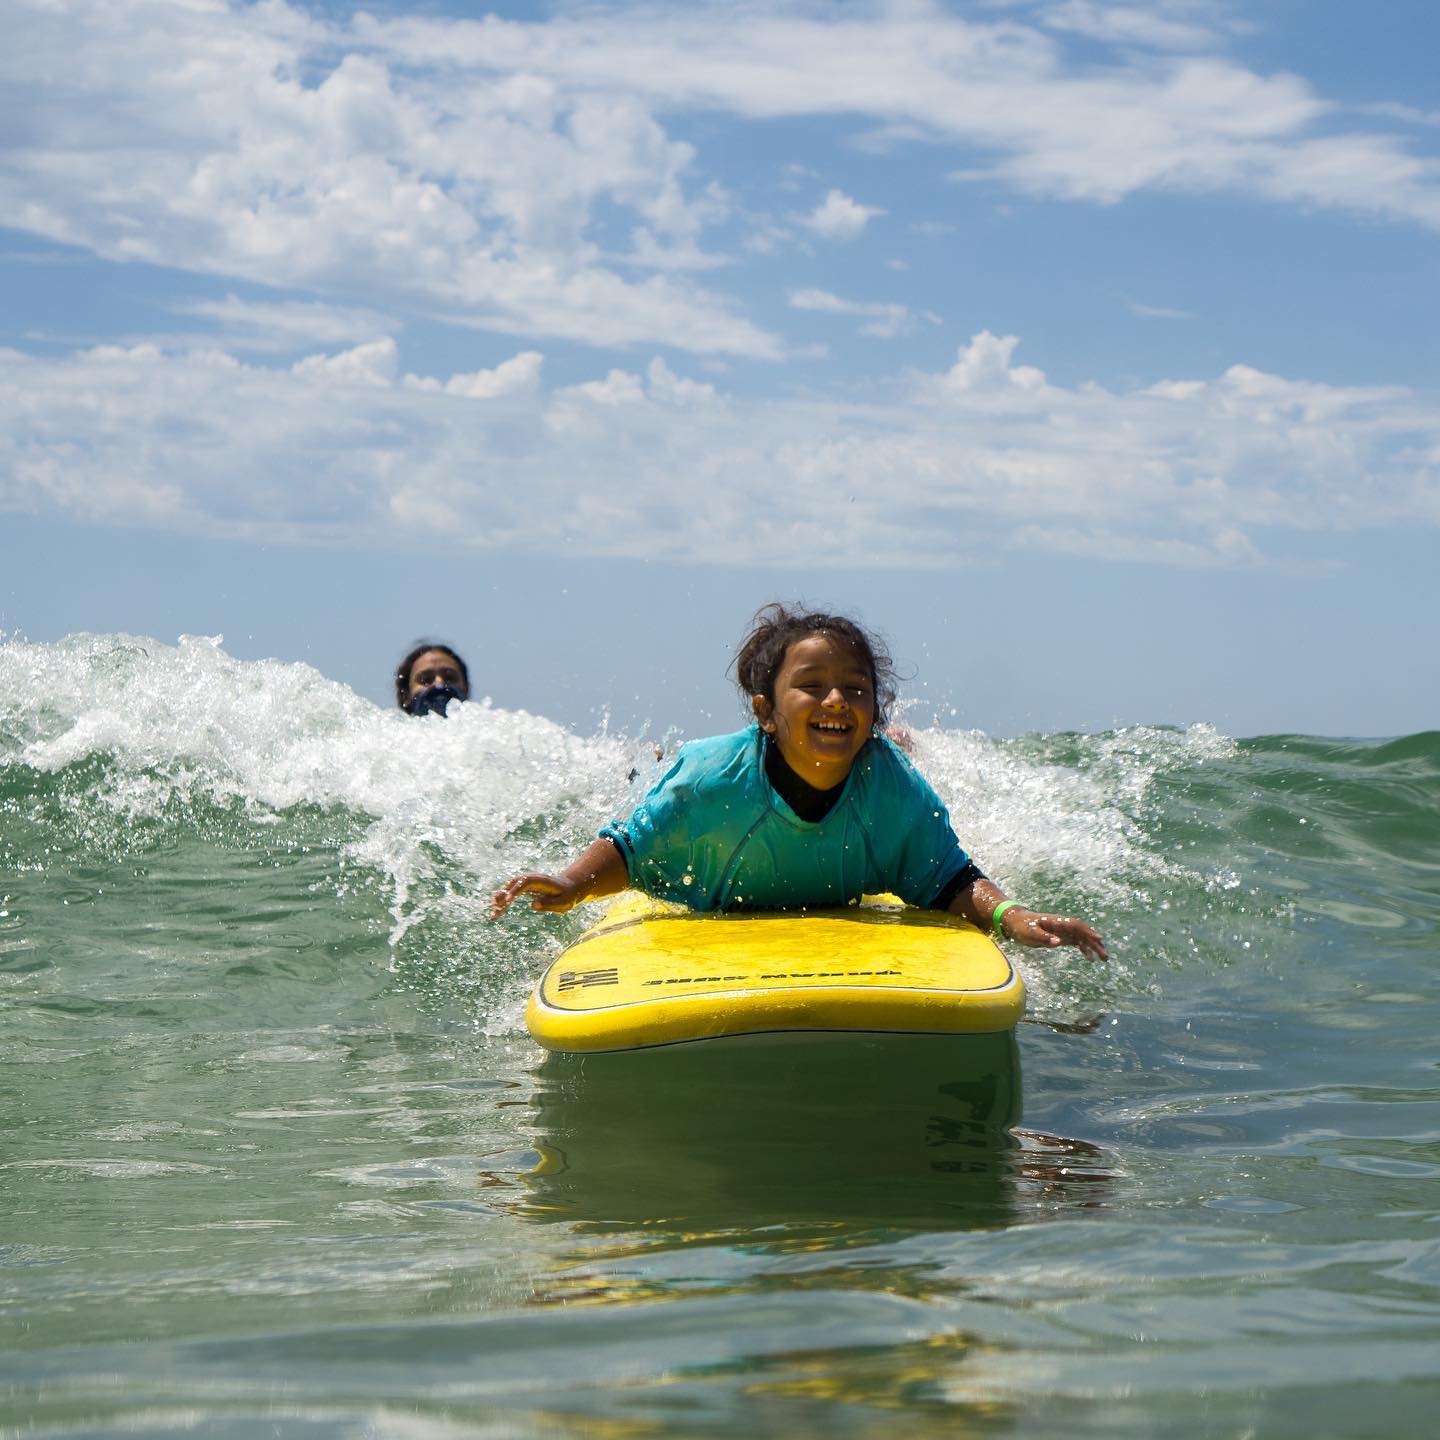 Big Smiles US4K Surf Therapy